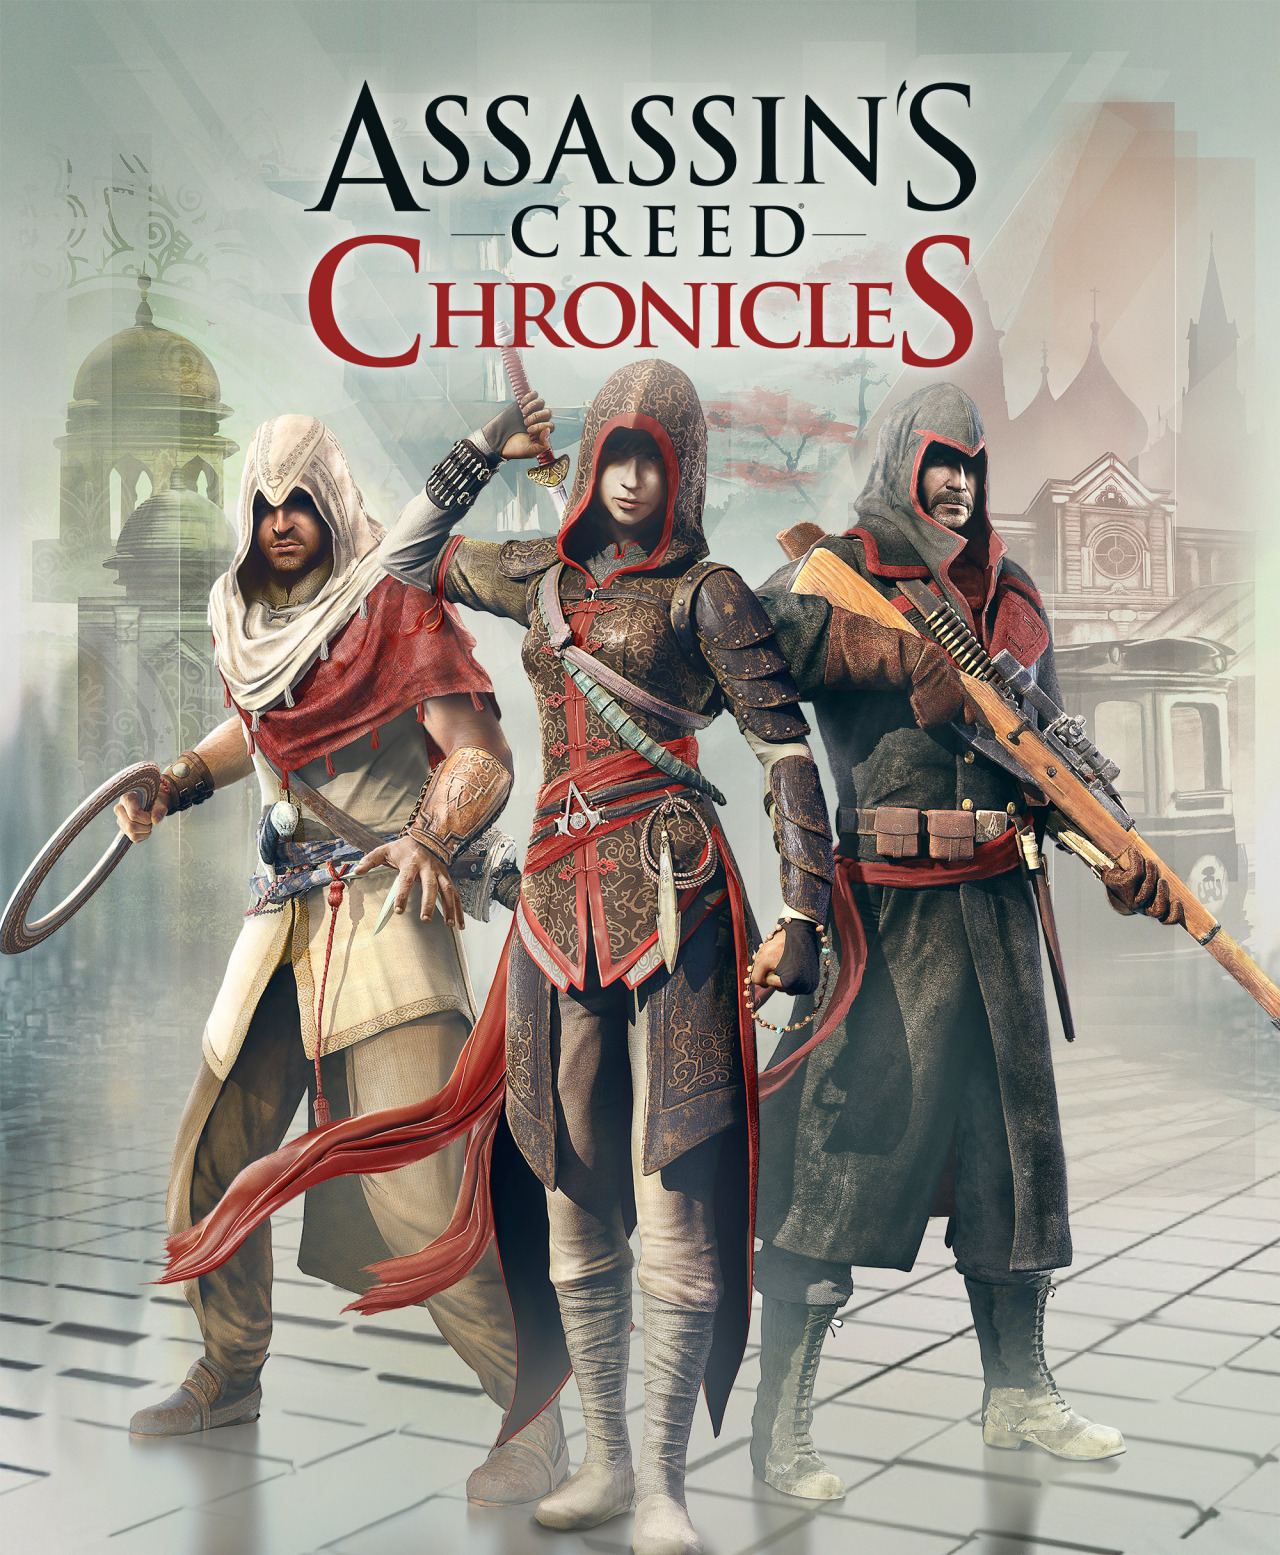 Assassin's creed chronicles, video game release schedule 2016